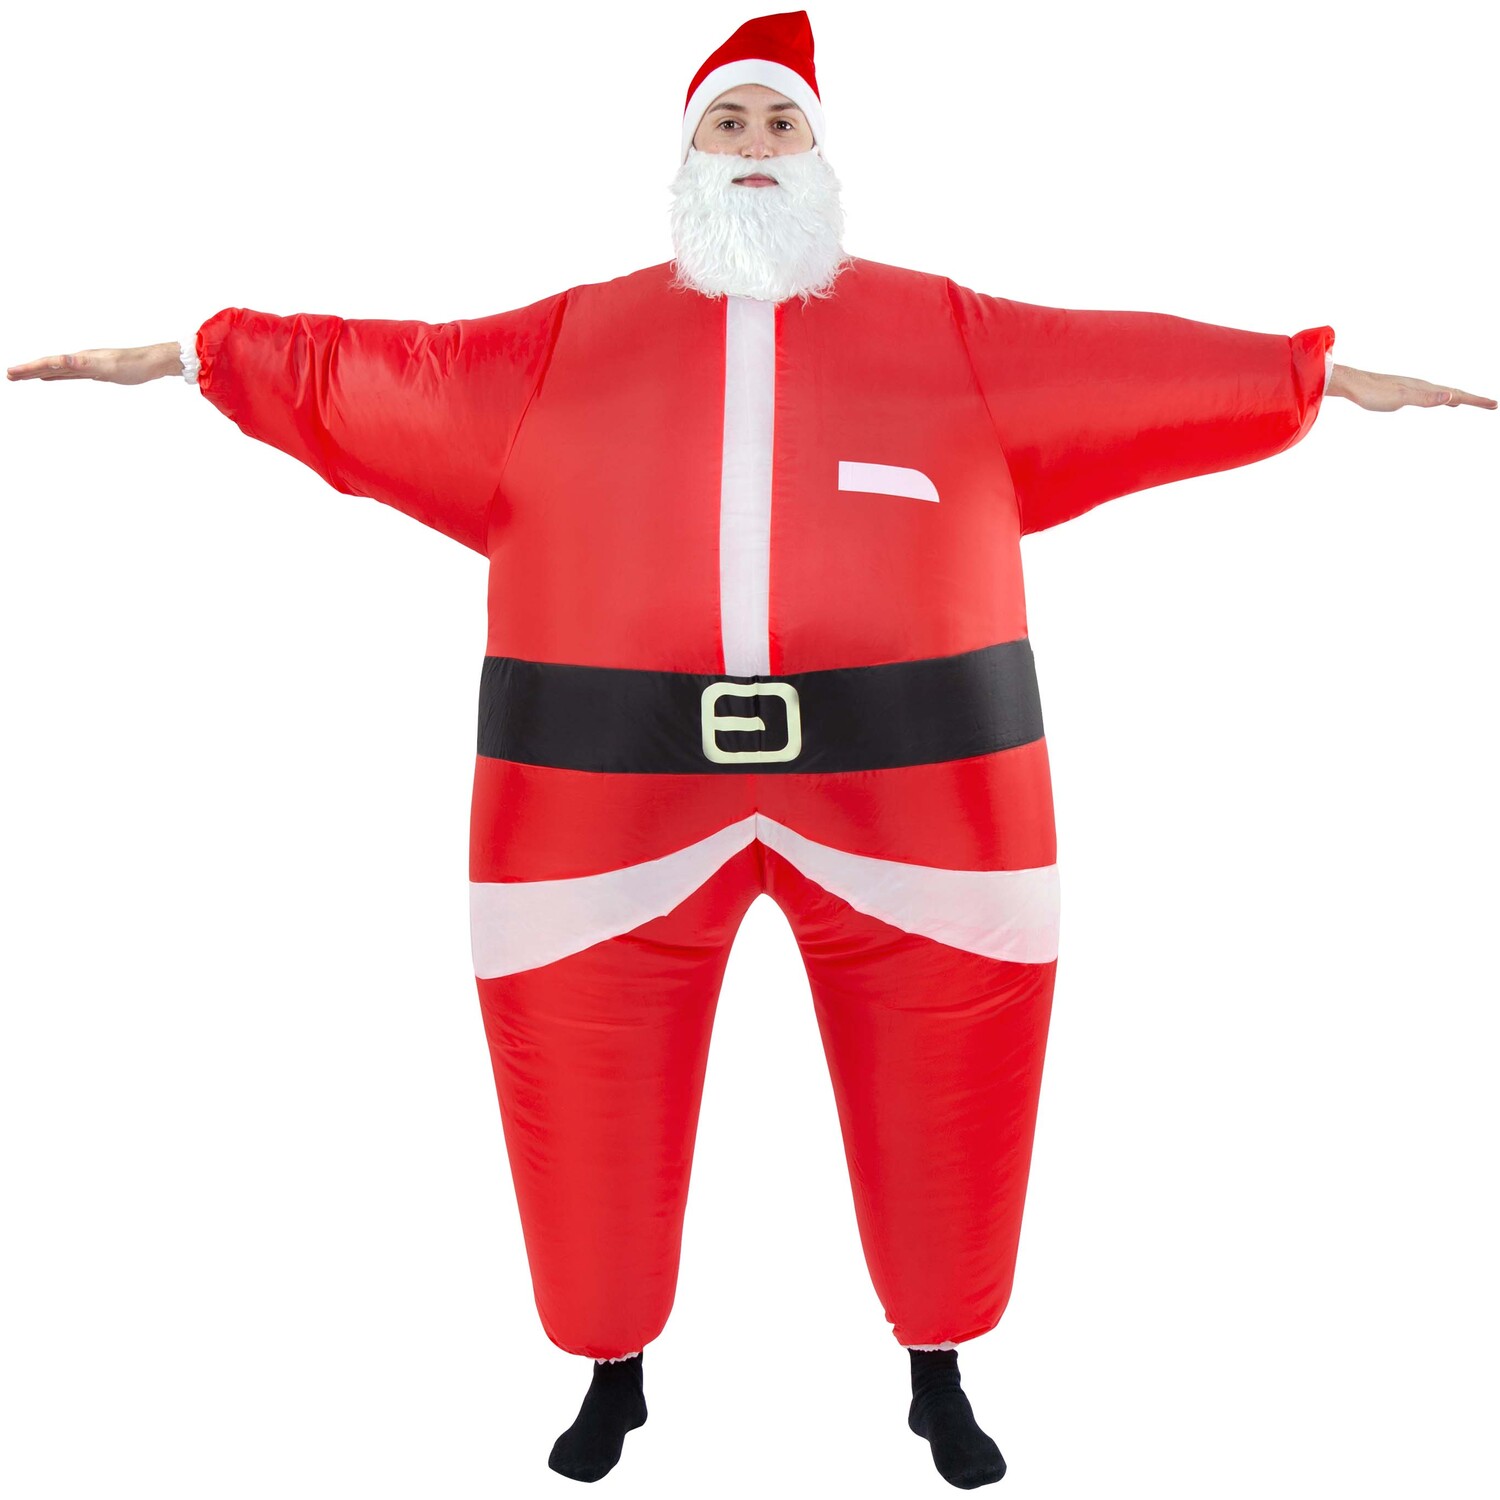 Benross Red Inflatable Santa Costume 5ft Image 2